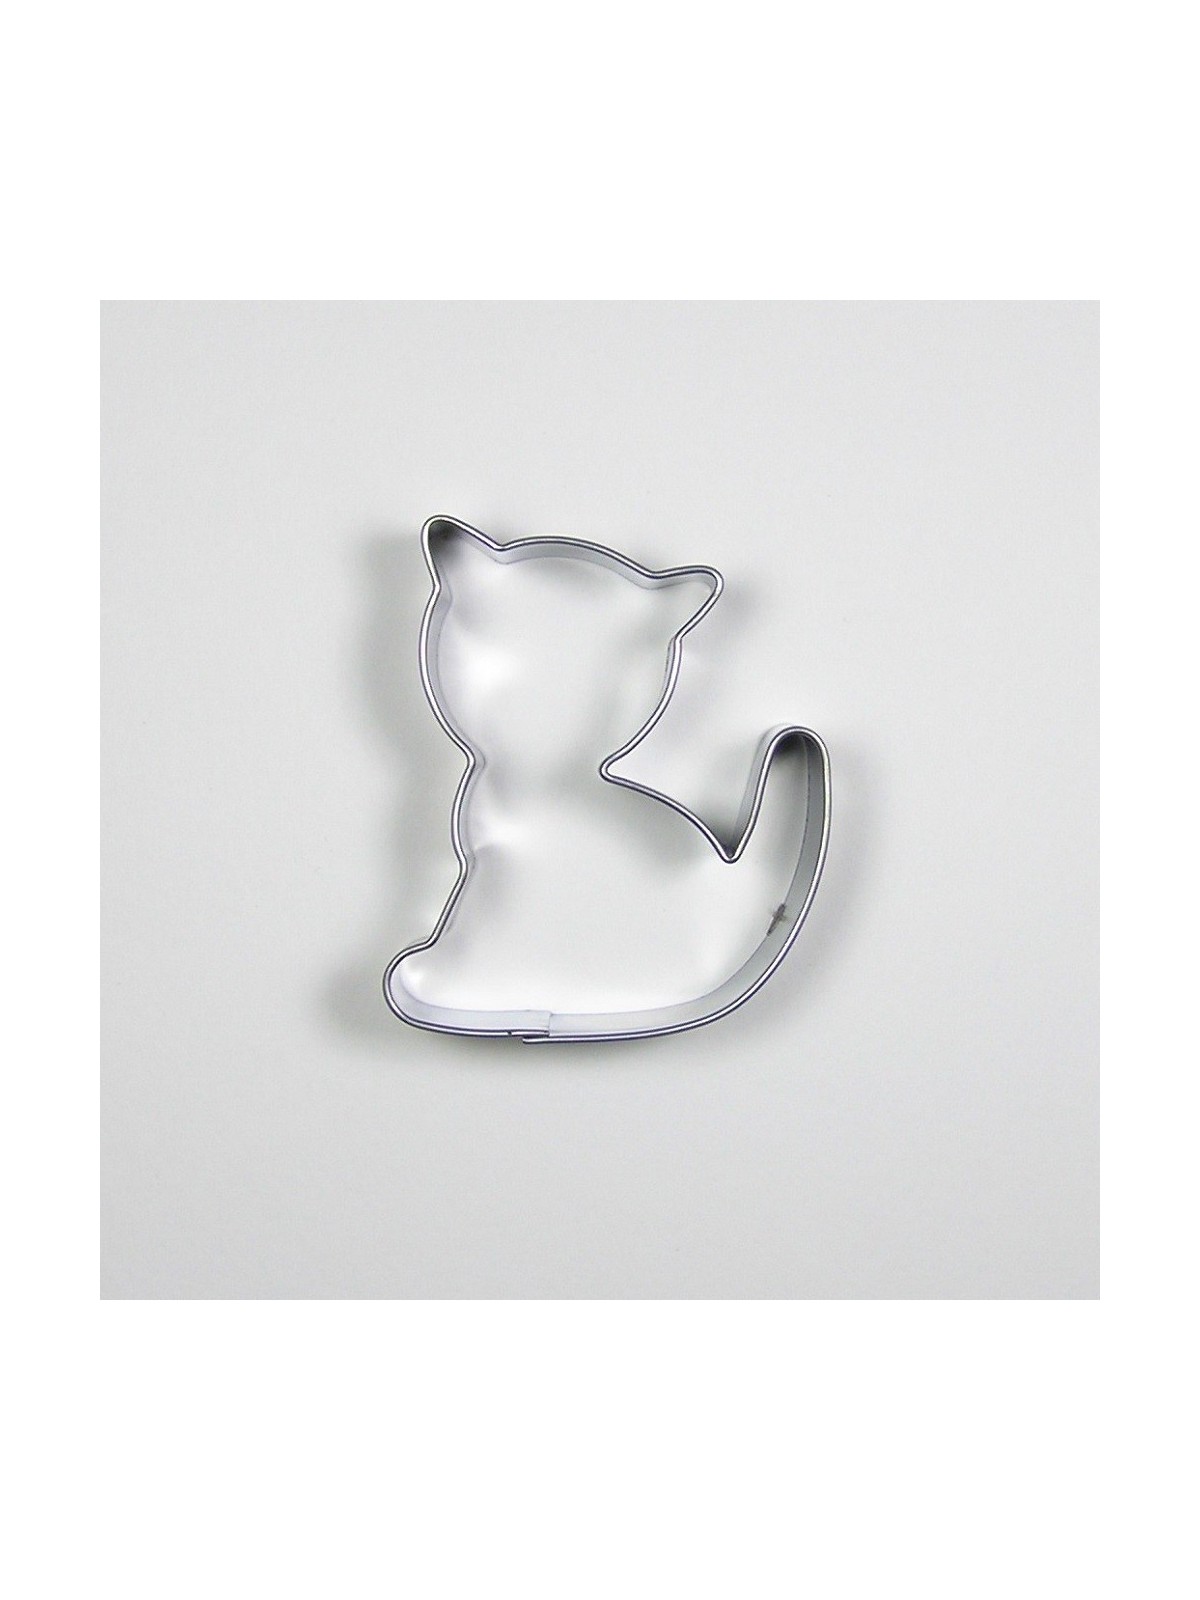 Stainless steel cutter - cat